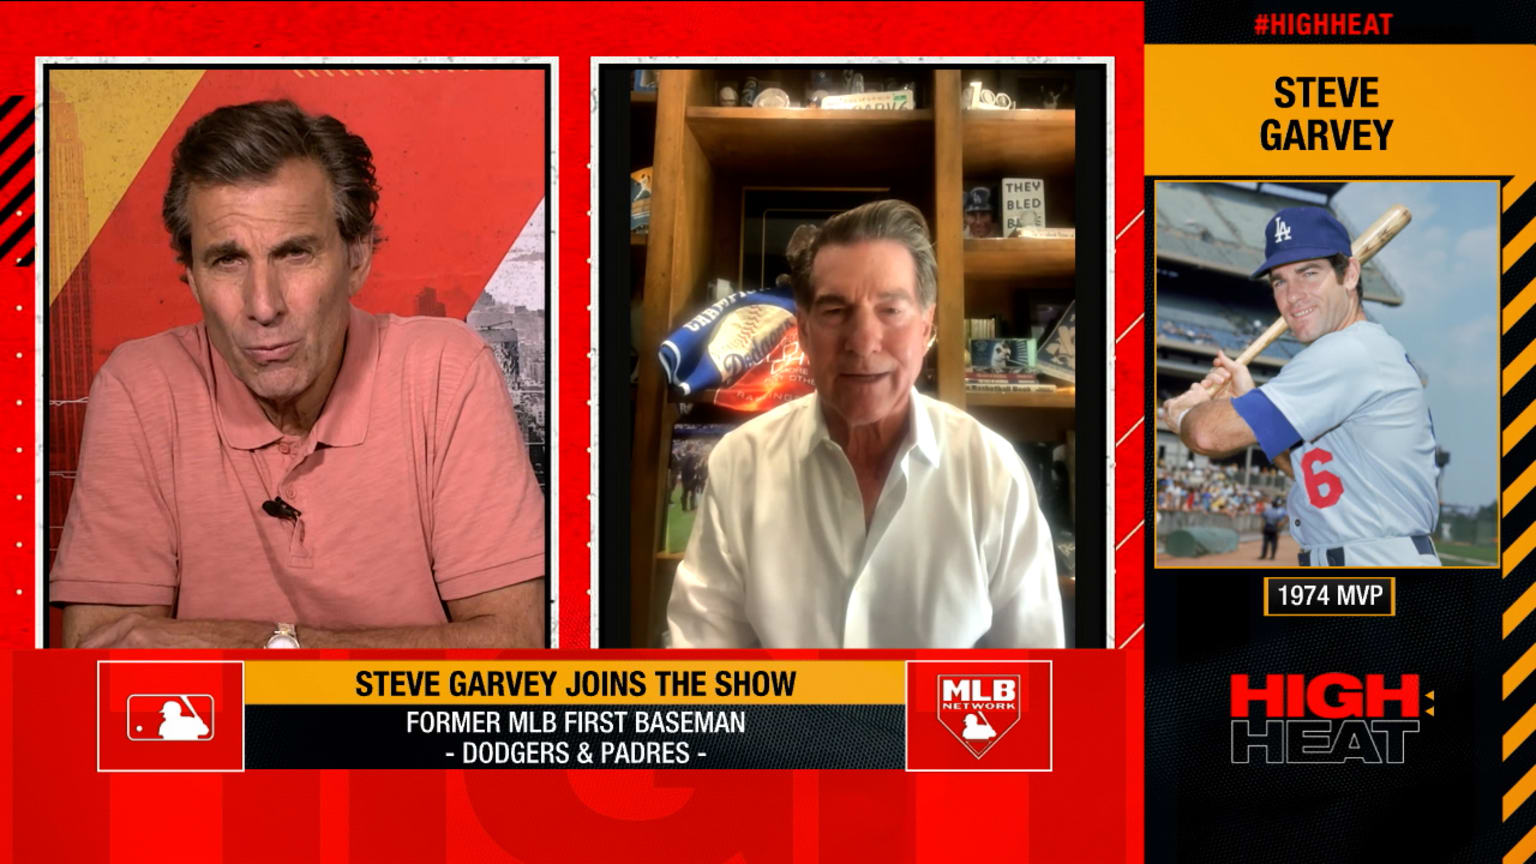 Steve Garvey will always have a place in Padres history